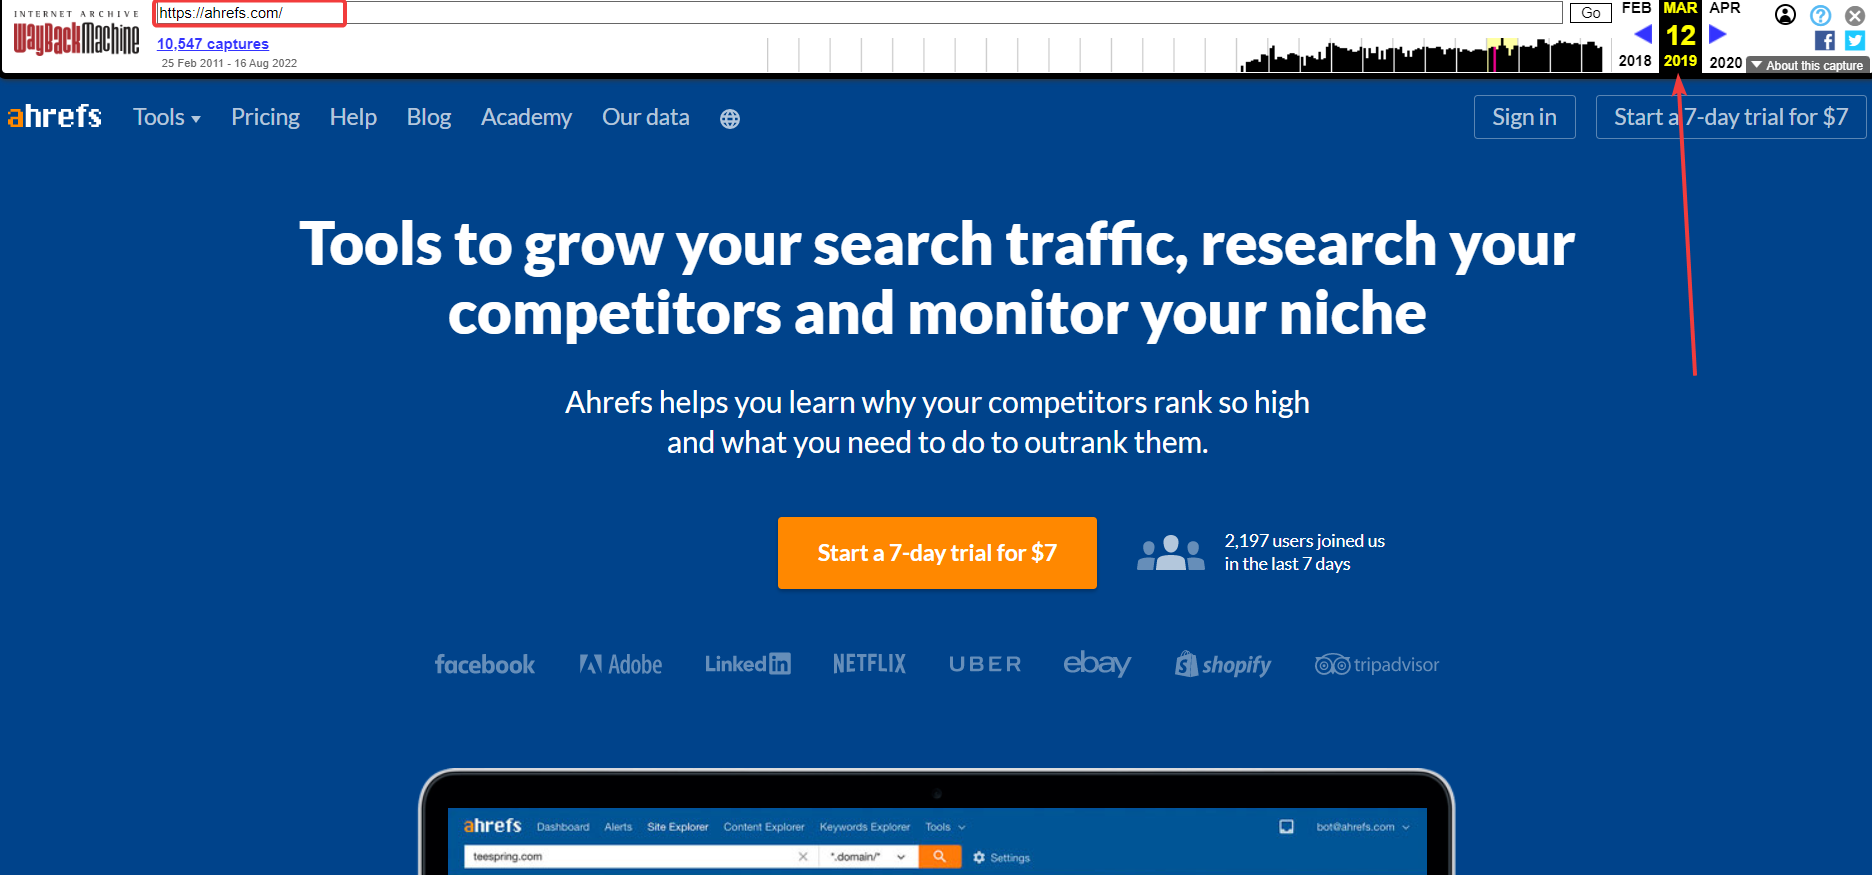 Ahrefs’ homepage in 2019